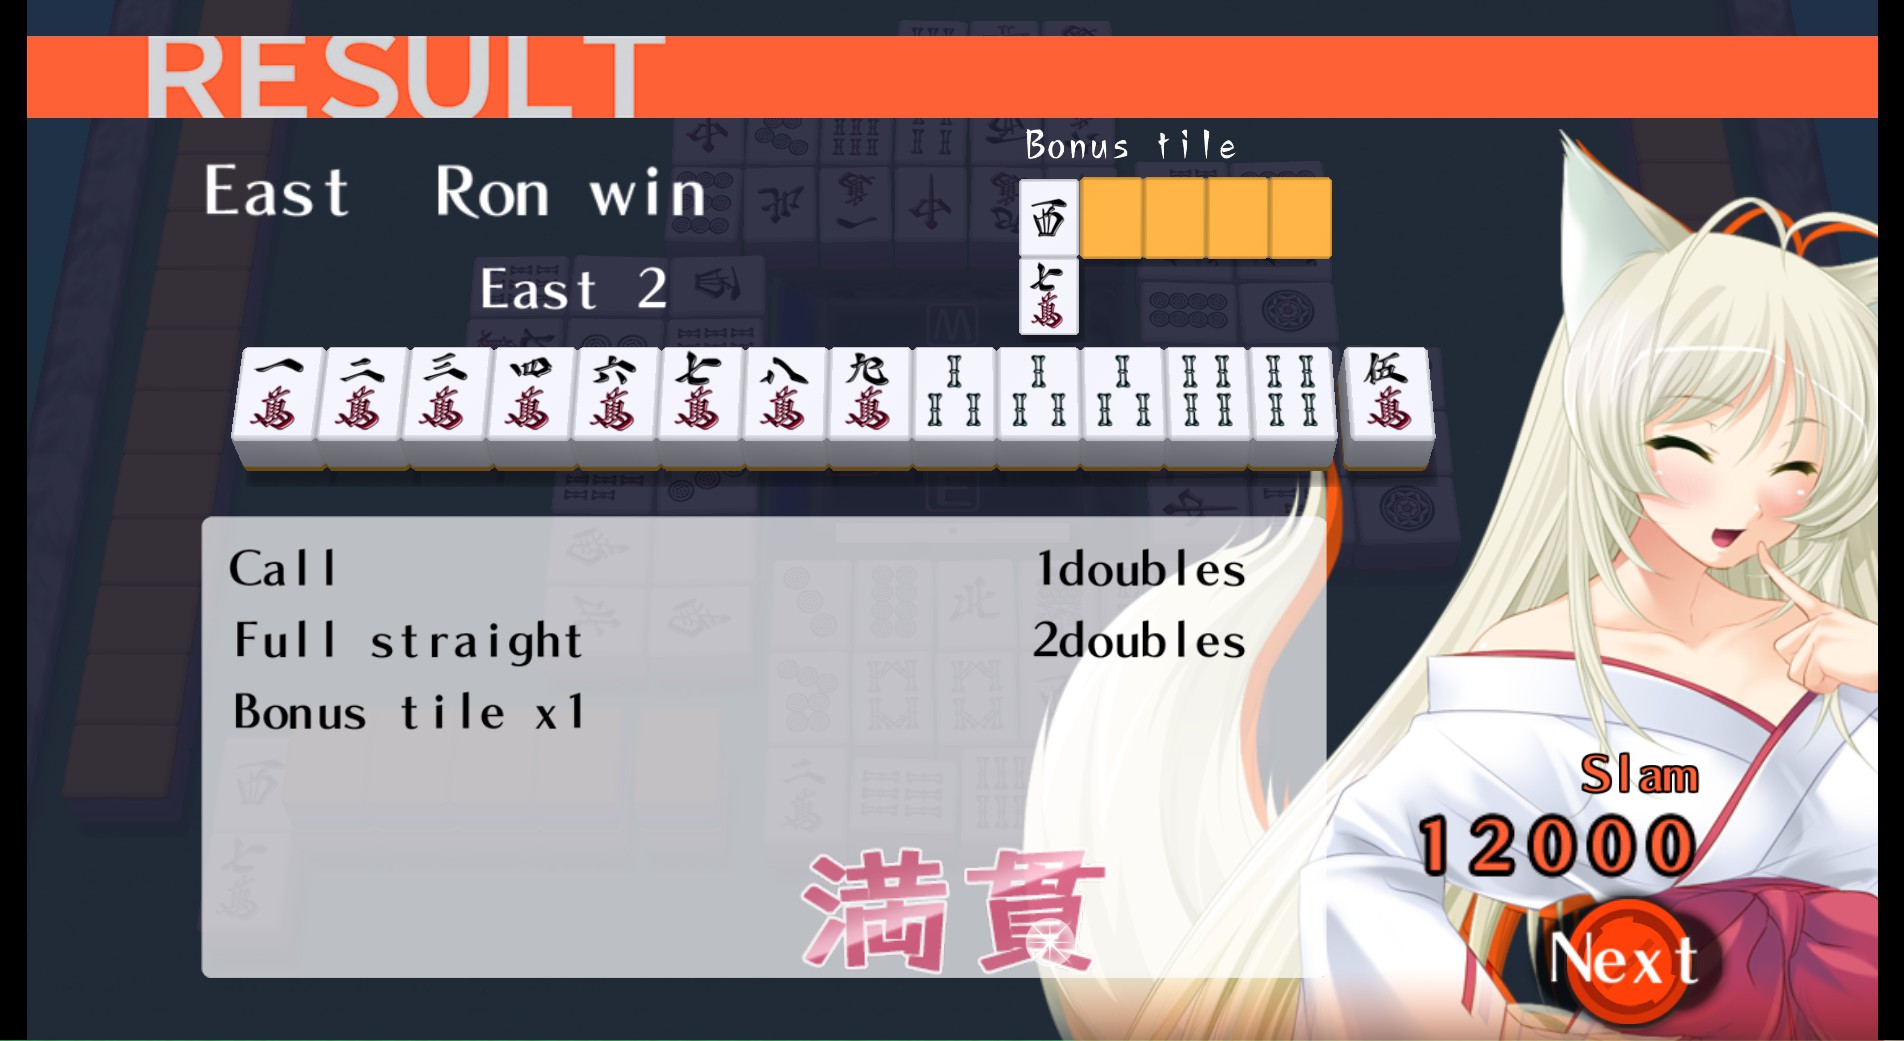 Mahjong Solitaire (Concept) - Giant Bomb